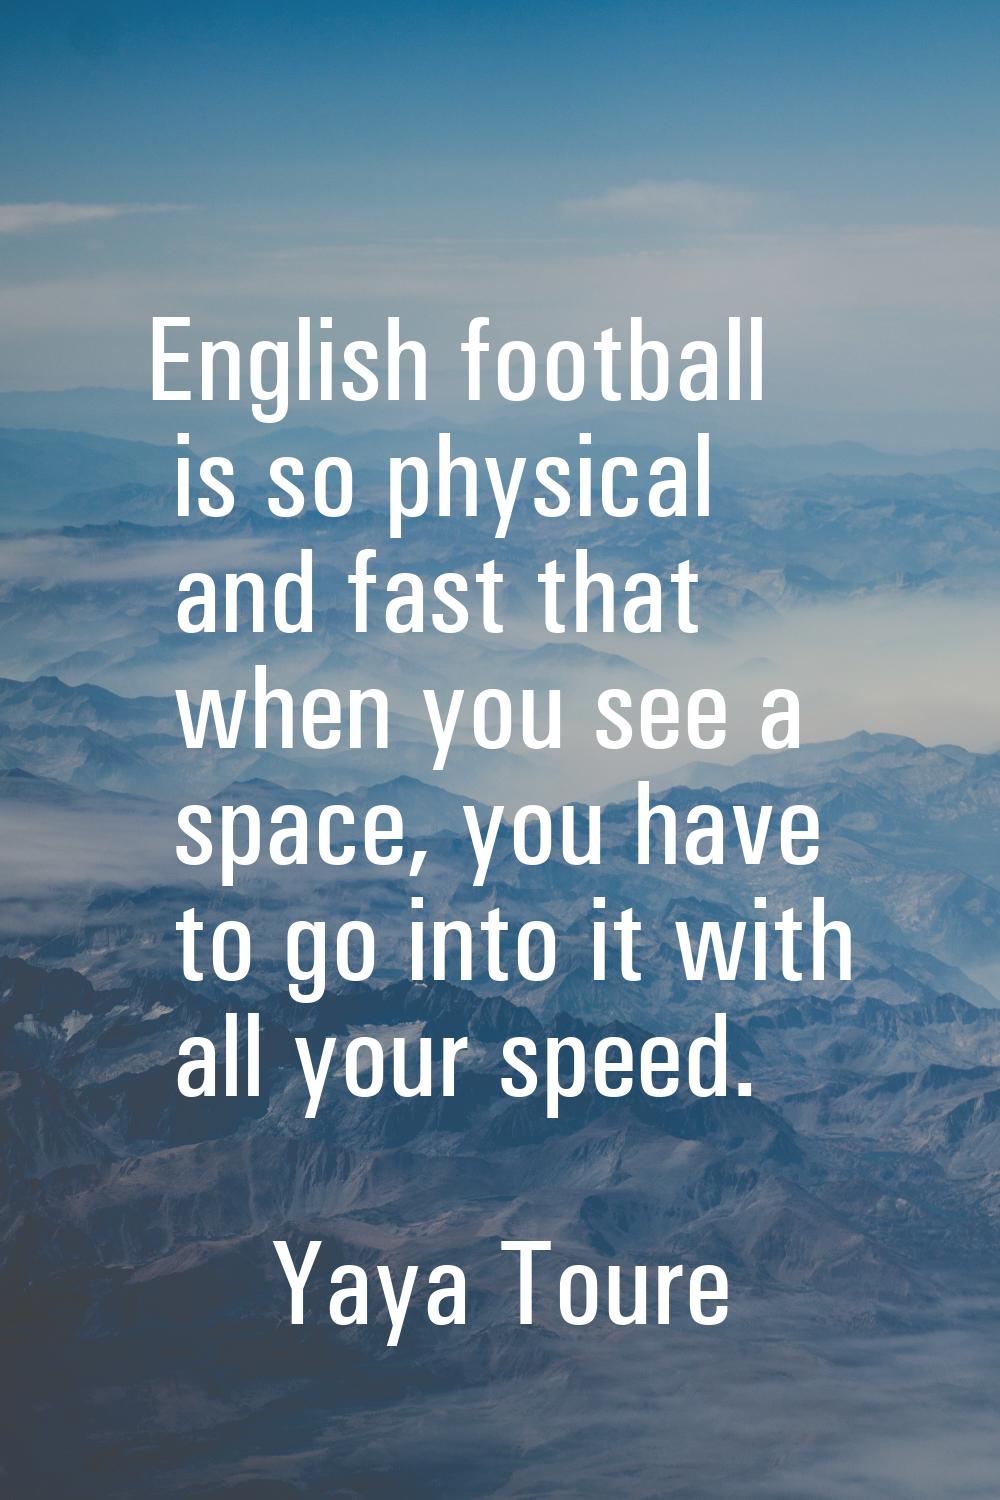 English football is so physical and fast that when you see a space, you have to go into it with all